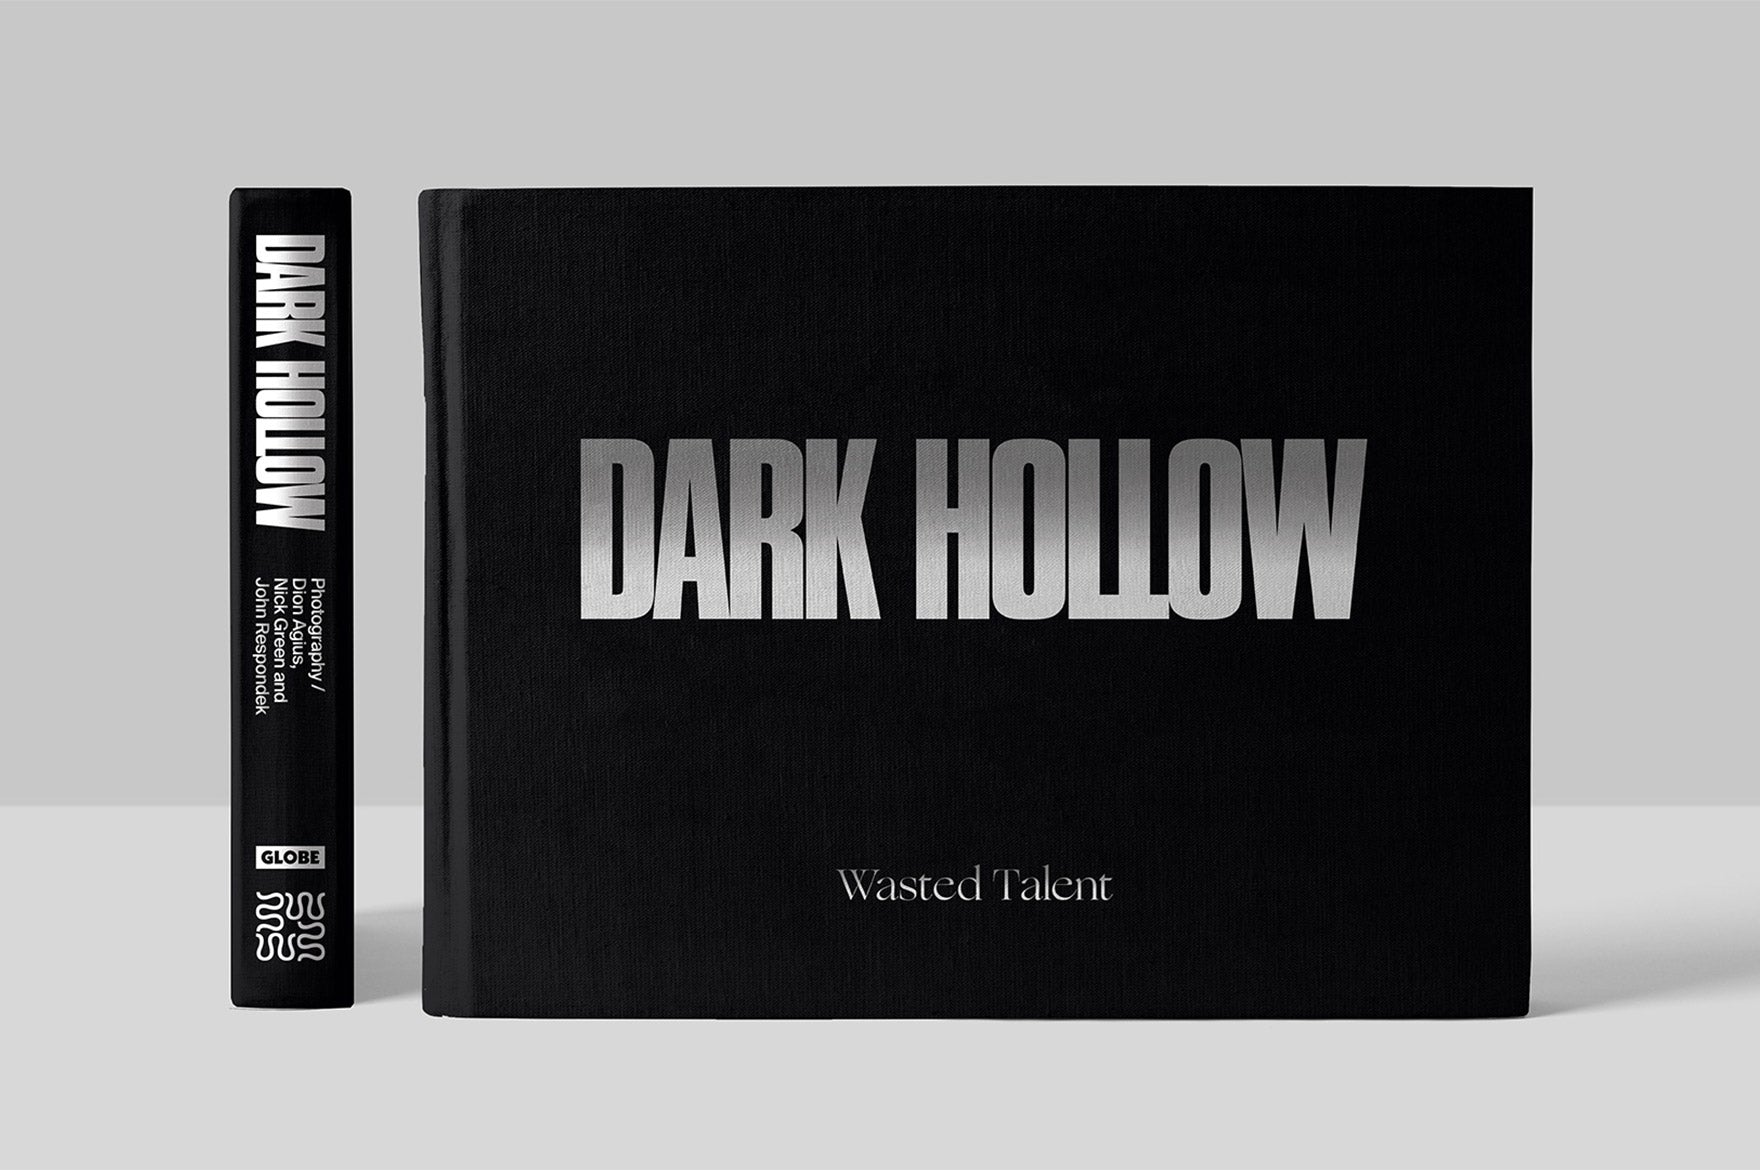 WASTED TALENT "DARK HOLLOW" PHOTO BOOK